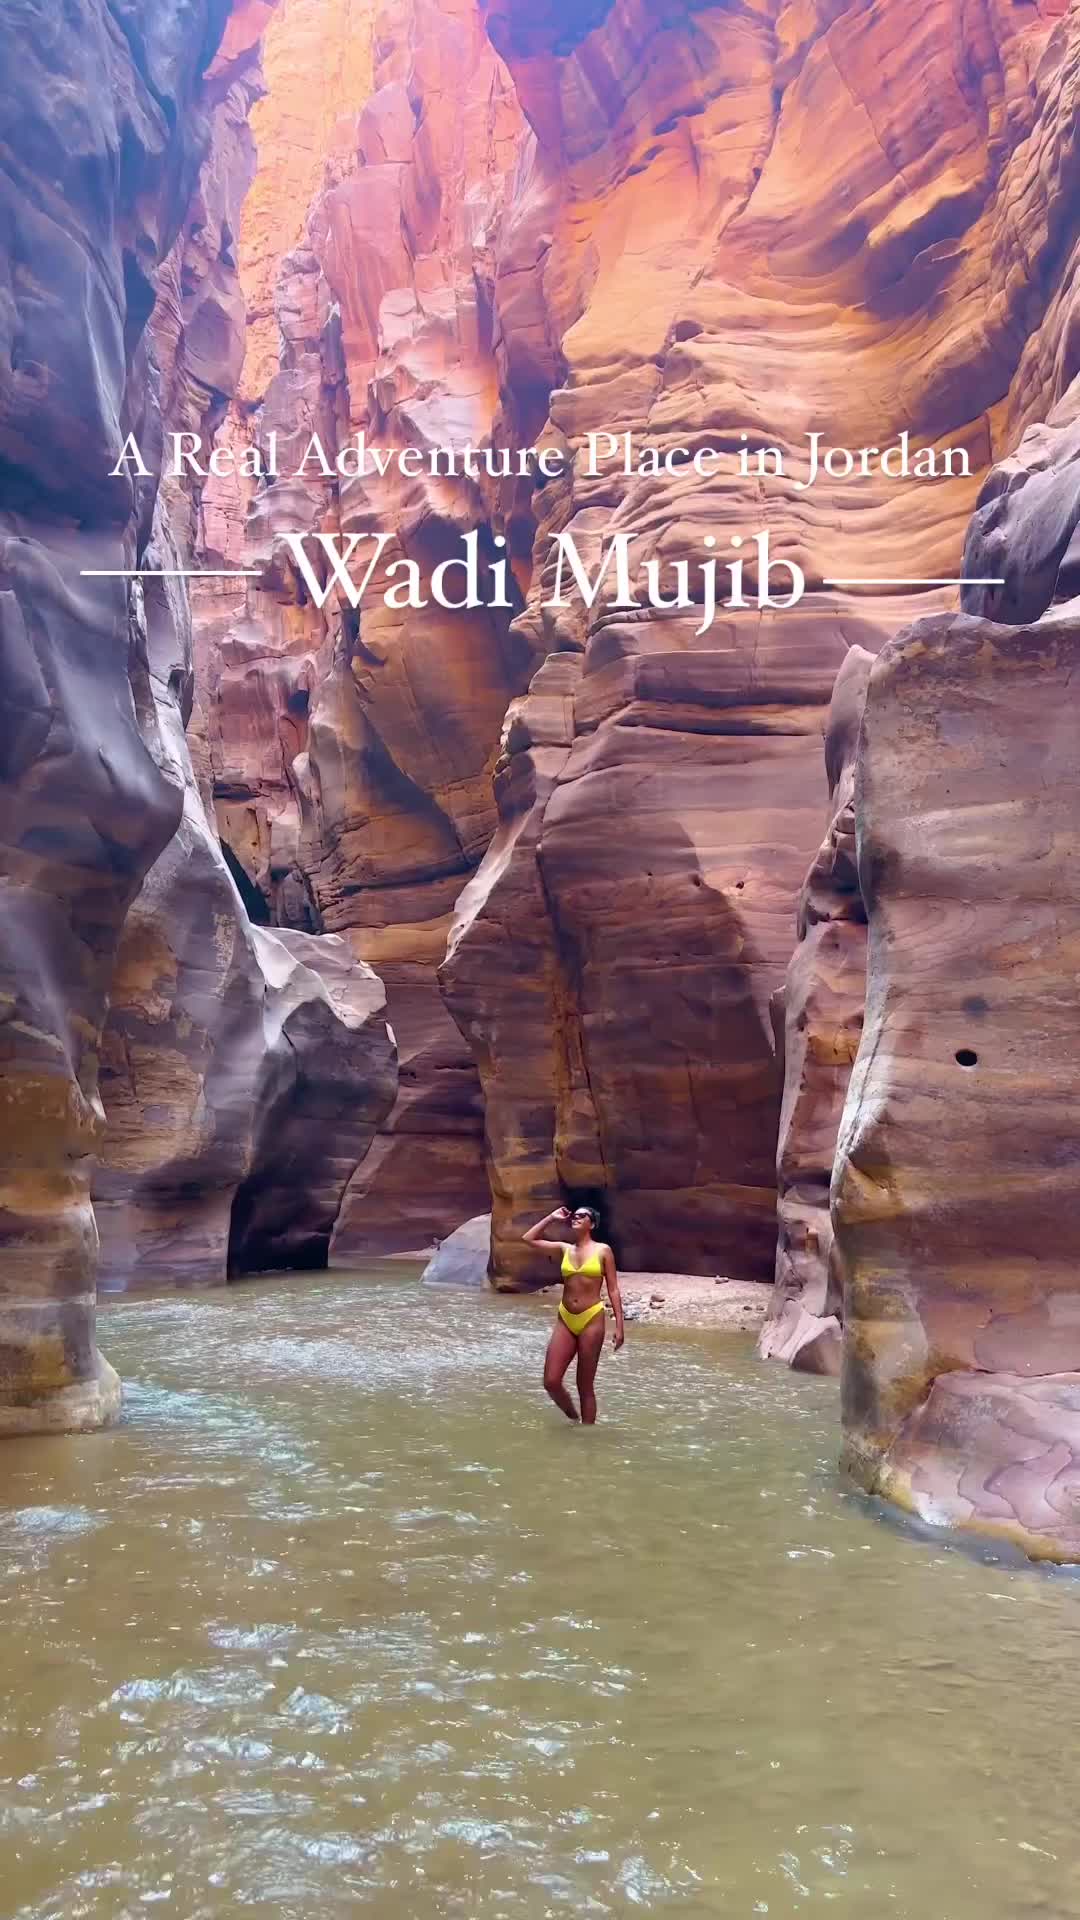 The Wadi Mujib canyon in Jordan 😍. 
Tag someone who loves adventure.

📌Save this post for your next trip in Jordan 🇯🇴 

We loved to discover this incredible canyon and his waterfalls.
Make sure to bring with you comfortable shoes, a waterproof bag and wear some sporty and comfortable clothes. 

P.s During winter this National Park is closed.

#jordan #giordania #wadimujib #canyon #adventuretravel #deadsea #visitjordan #bucketlistadventures 

Best places to visit in Jordan - Adventure in Jordan - Adventure trip in Jordan